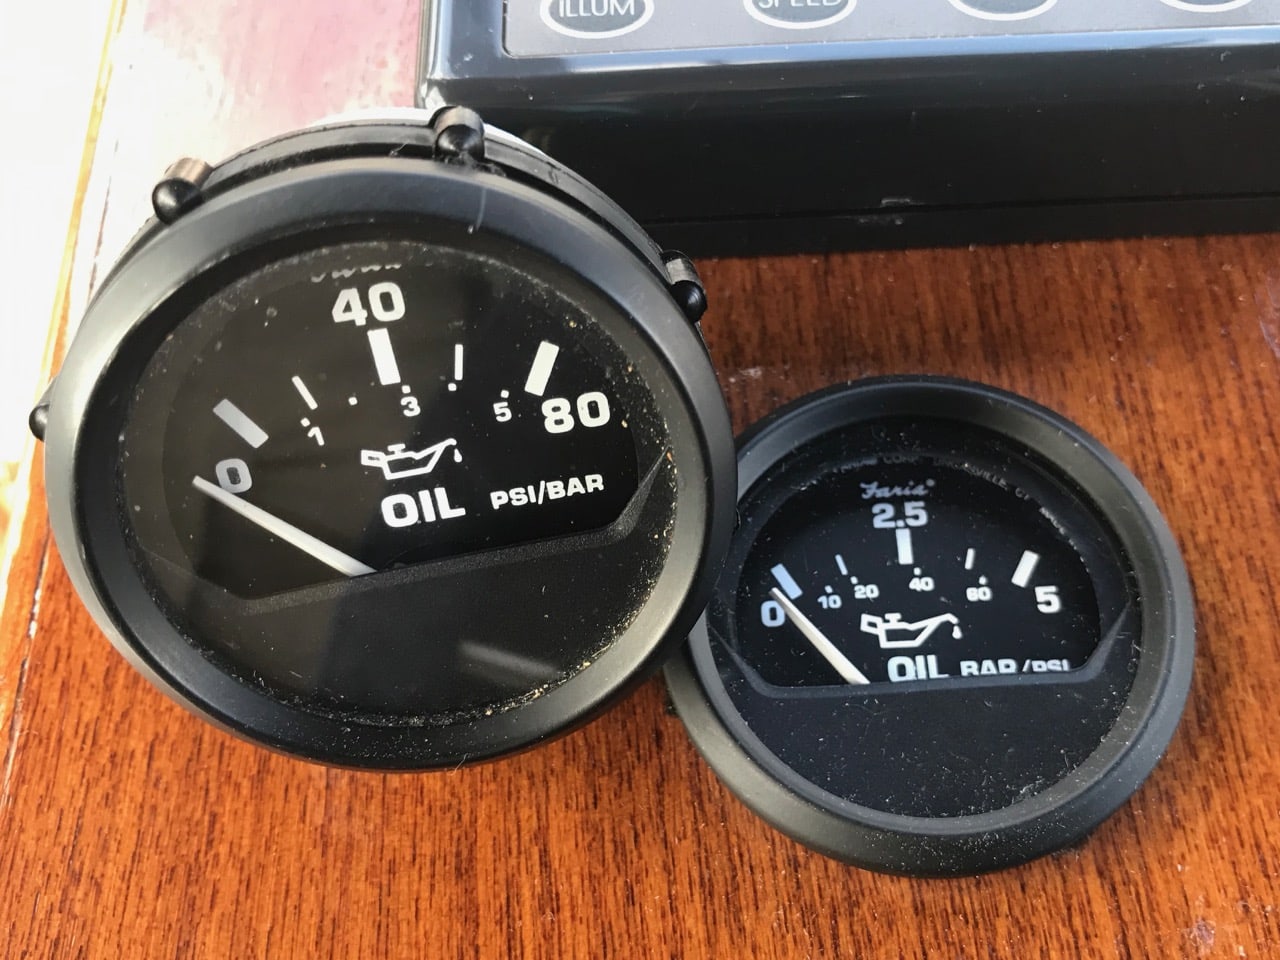 New gauge installed with the old US type on the left.